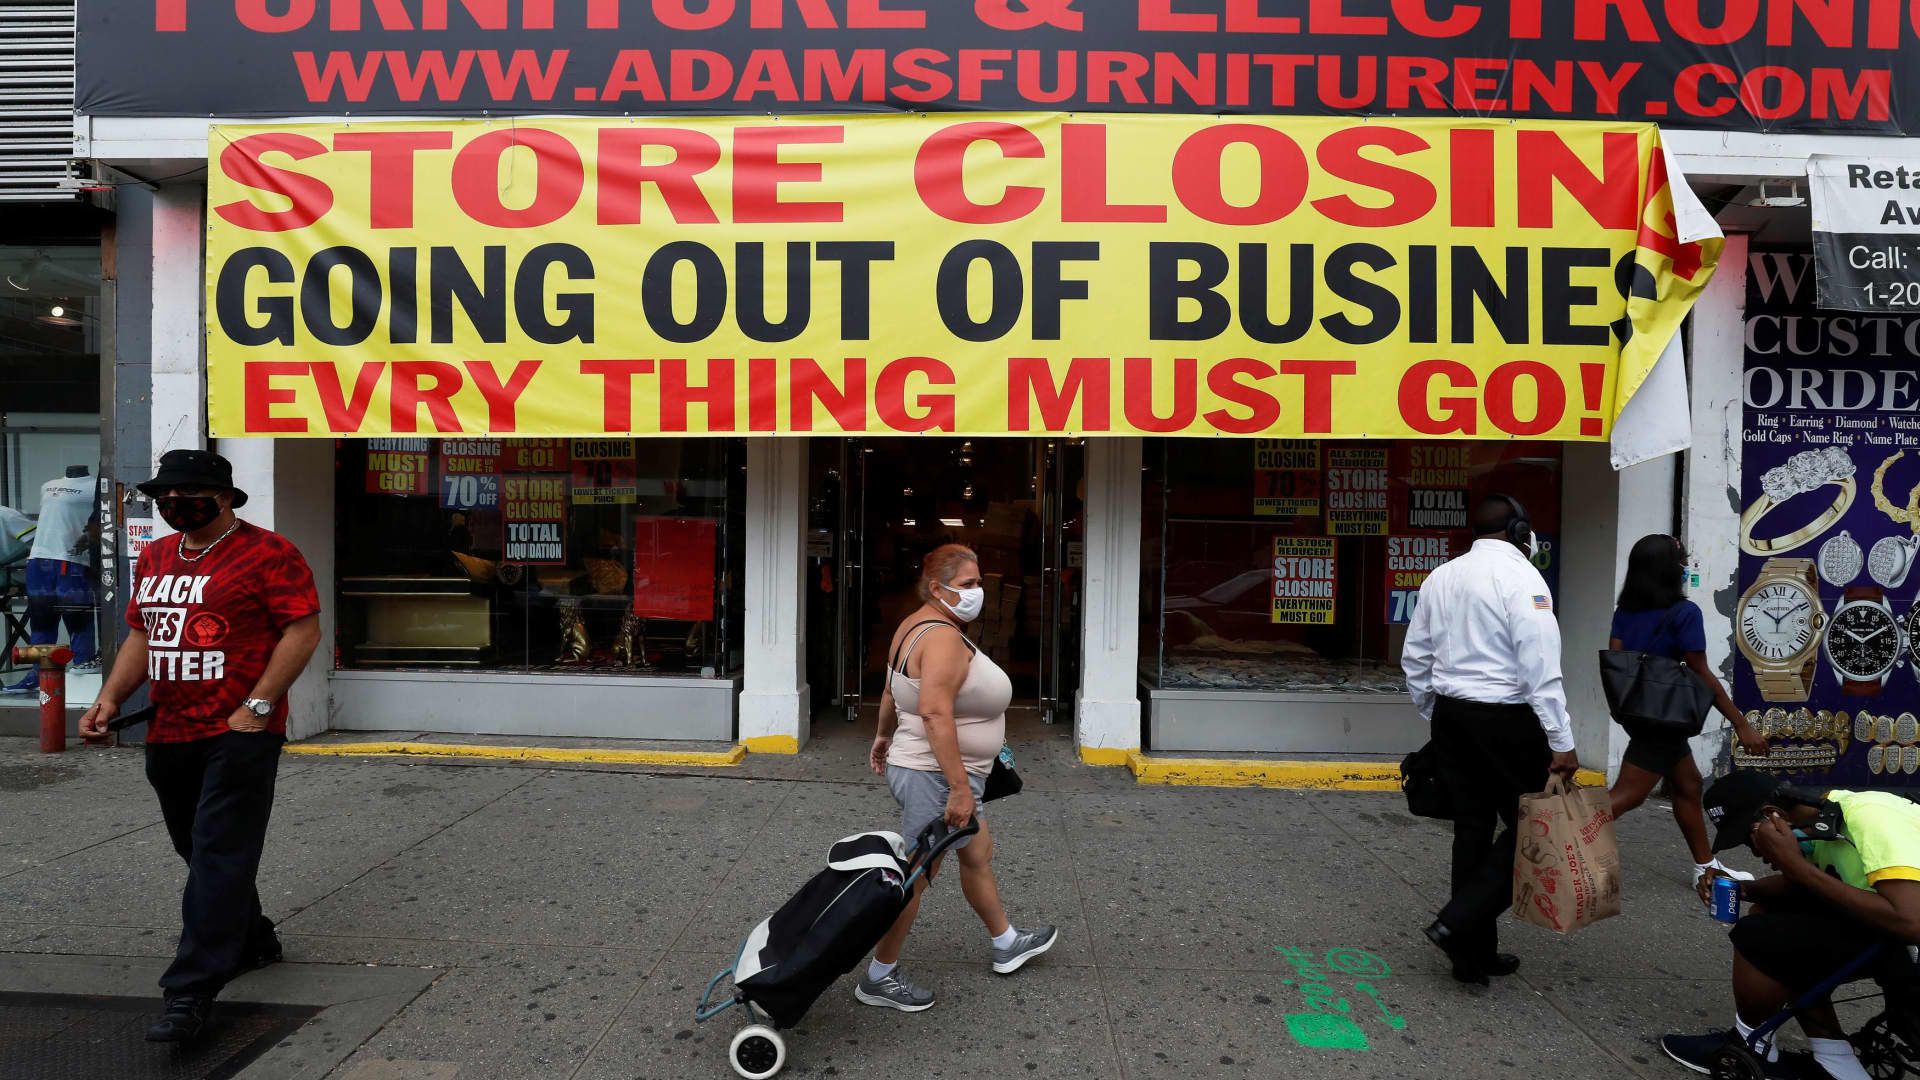 People walk by a store going out of business along 125th street in the Harlem neighborhood of New York City, August 7, 2020.